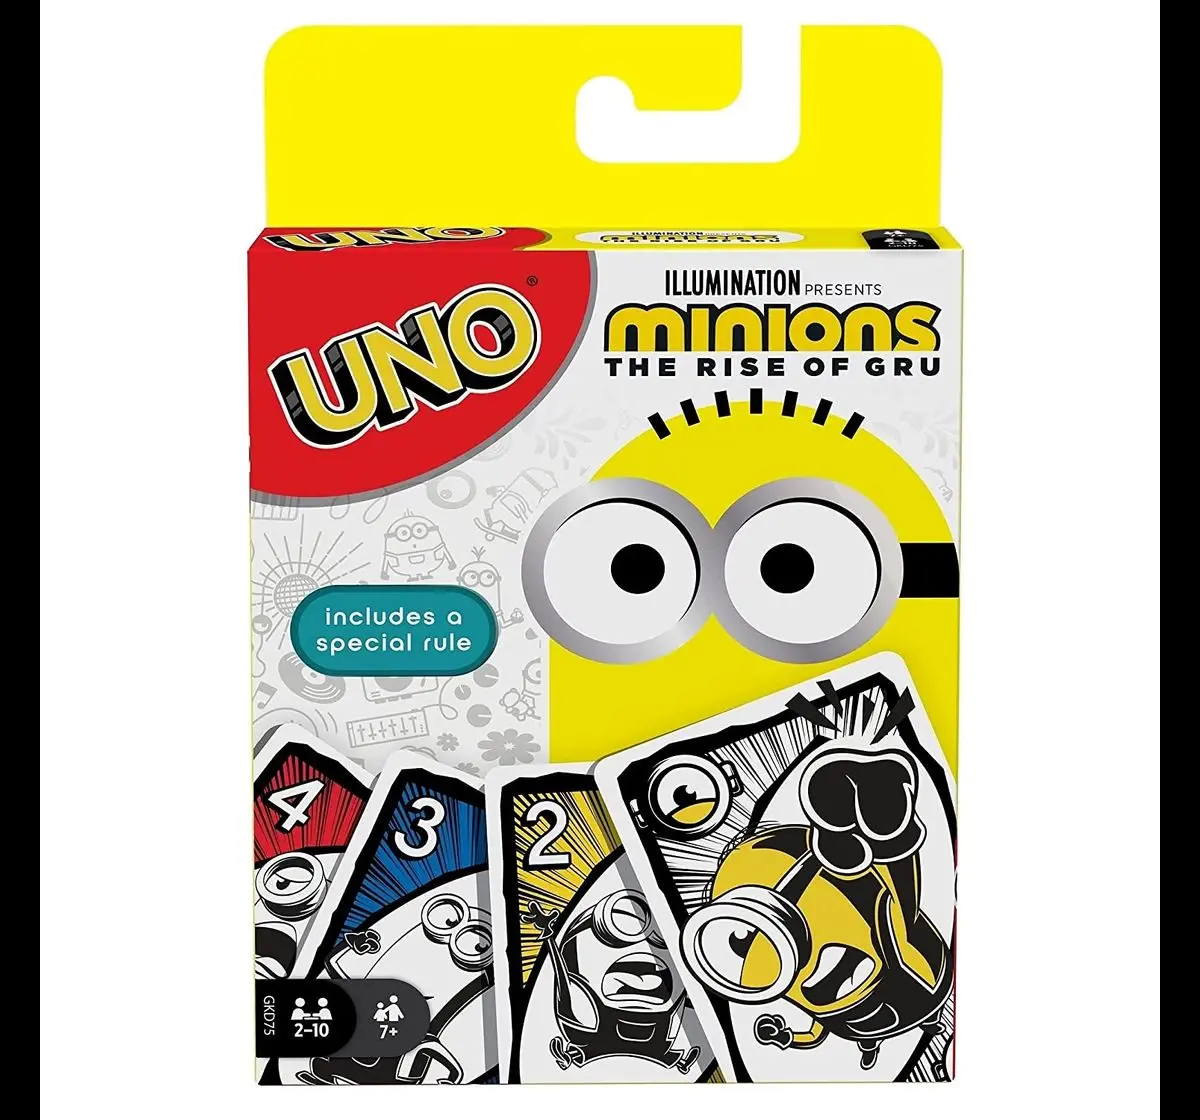 UNO Minions 2 Card Game for Kids, 7Y+